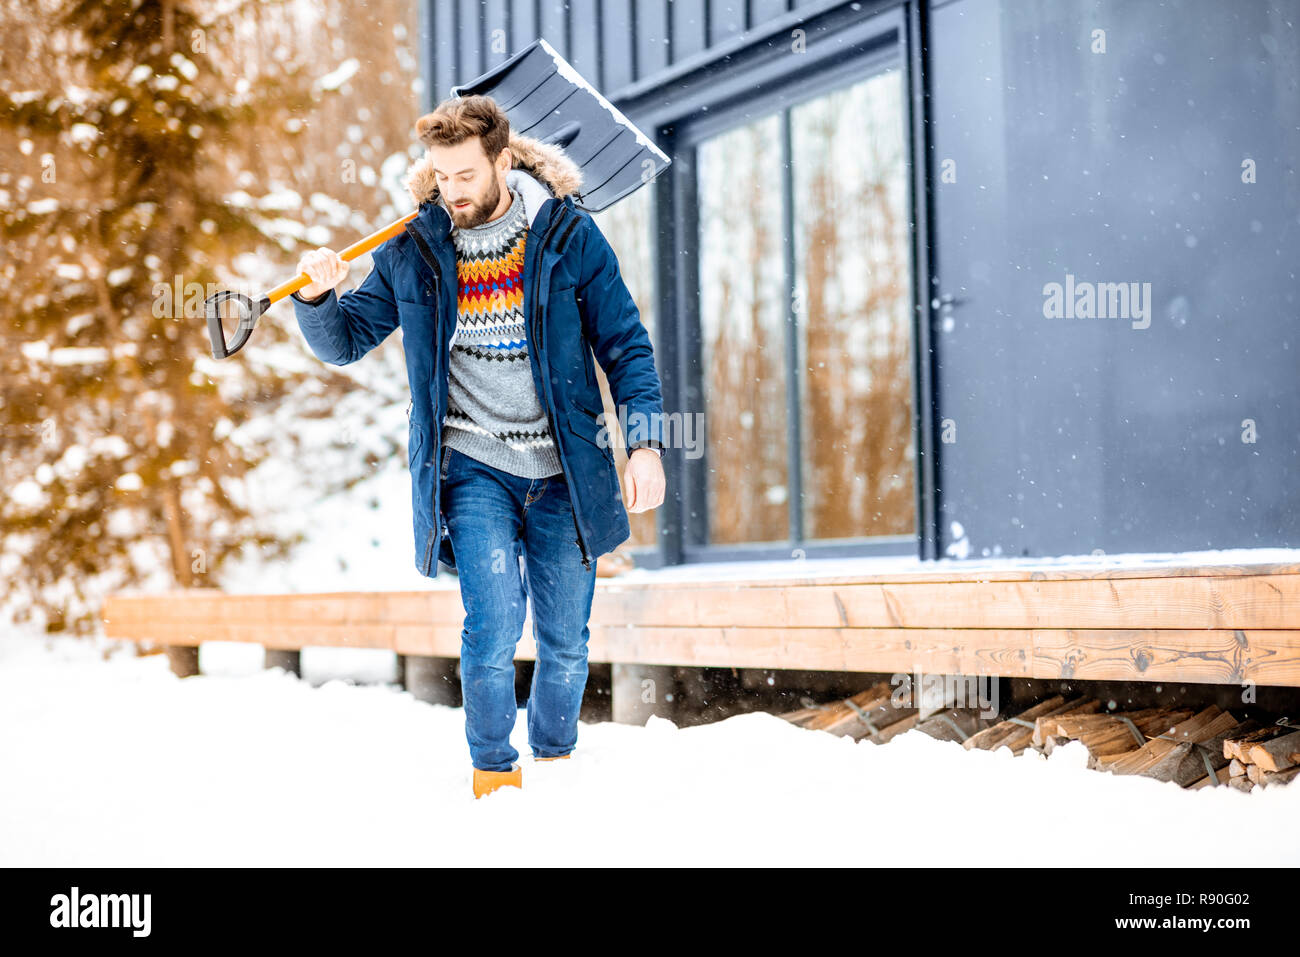 https://c8.alamy.com/comp/R90G02/portrait-of-a-man-in-winter-clothes-with-a-snow-shovel-near-the-modern-house-in-the-mountains-R90G02.jpg